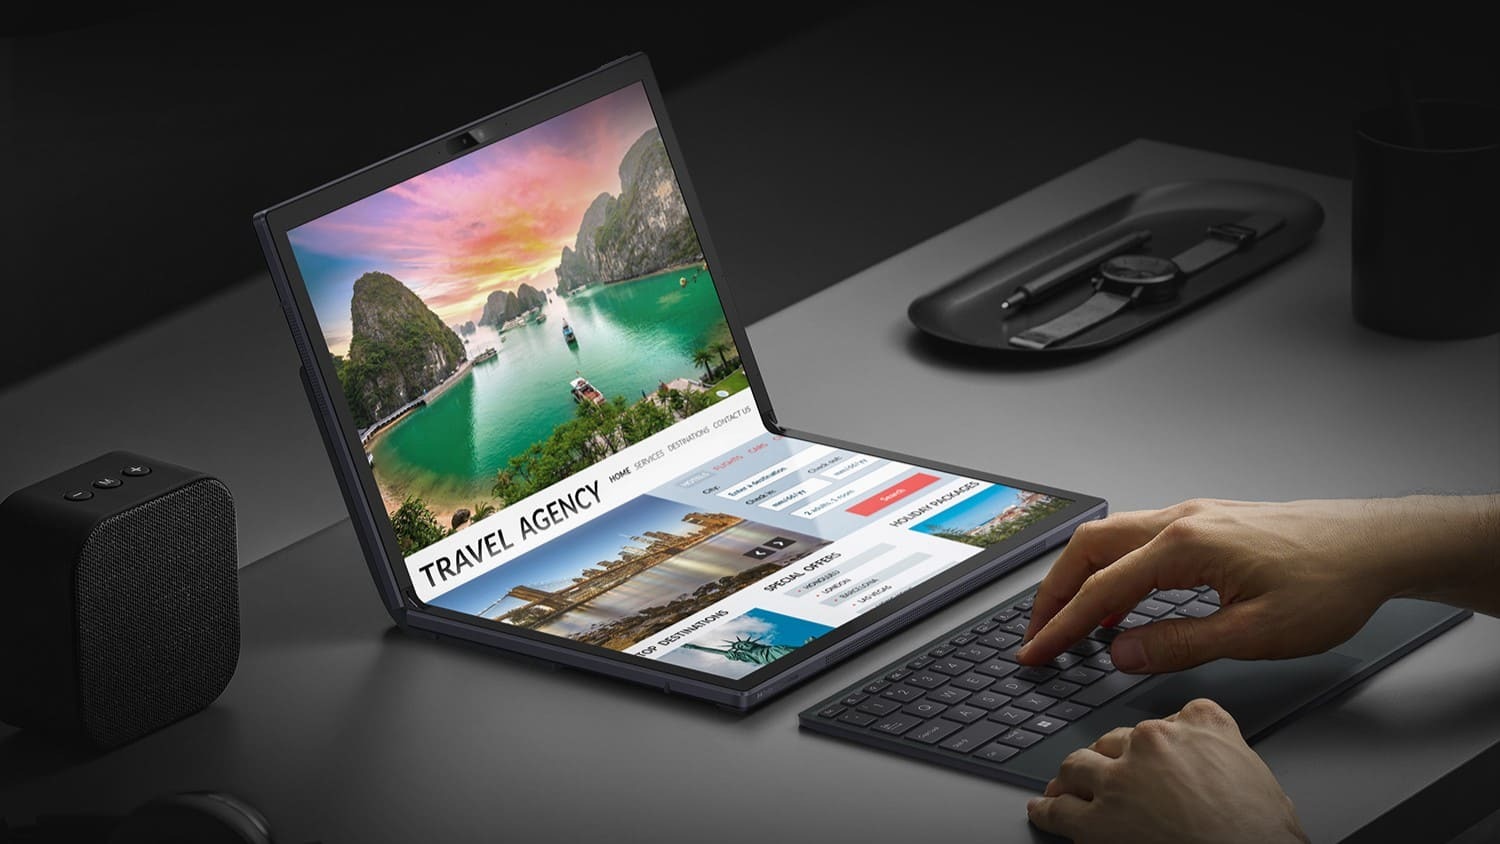 Samsung prepping foldable OLED display laptop with the largest screen diagonal when closed